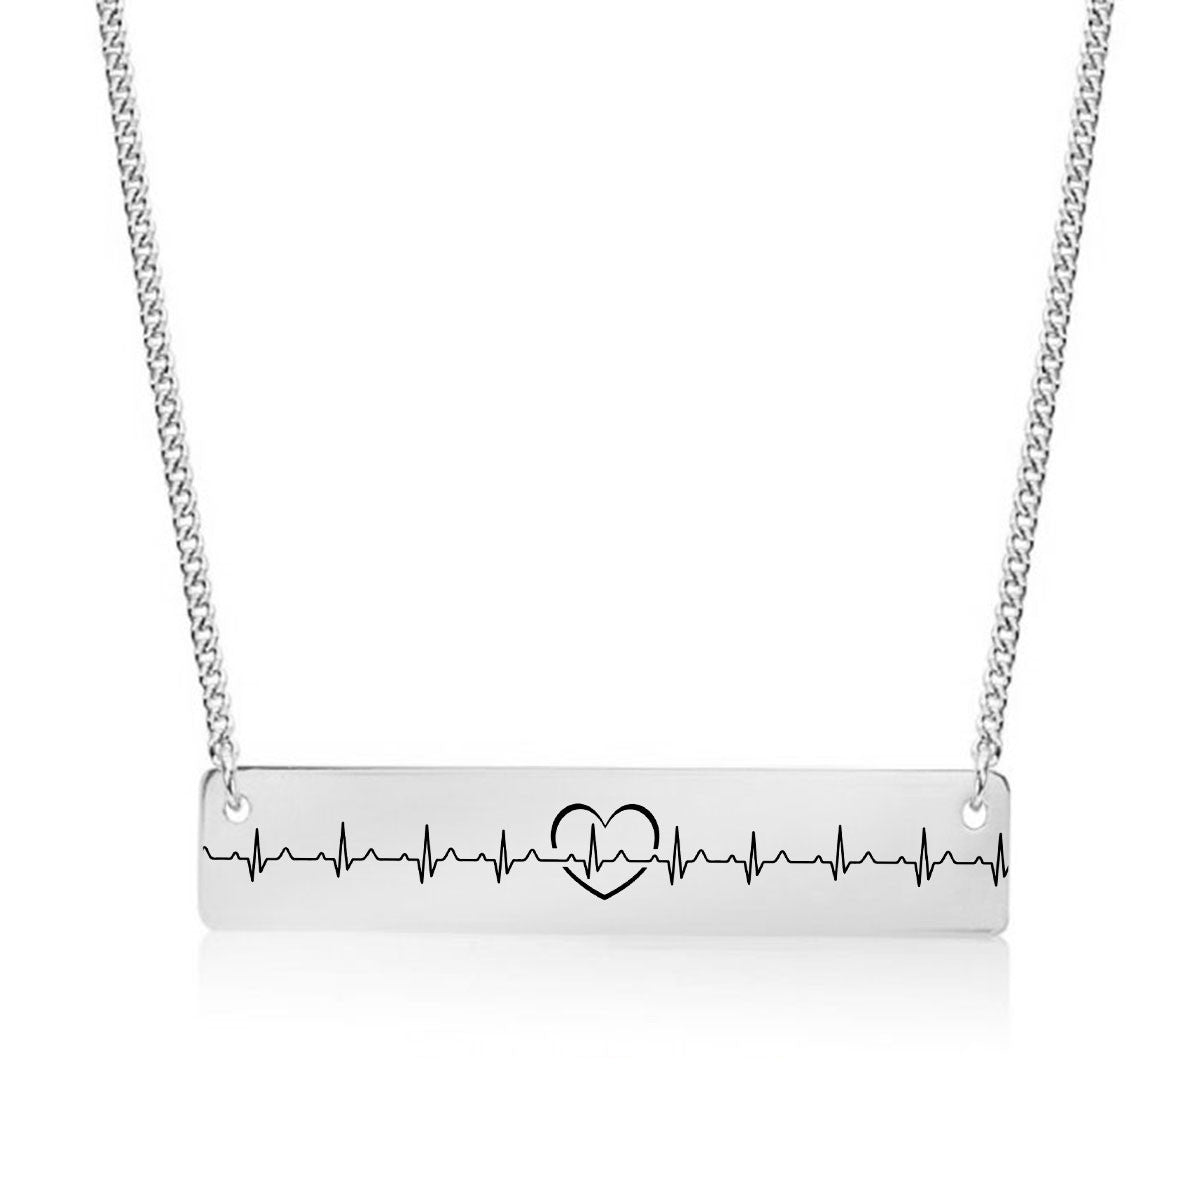 Beating Heart Gold / Silver Bar Necklace - pipercleo.com